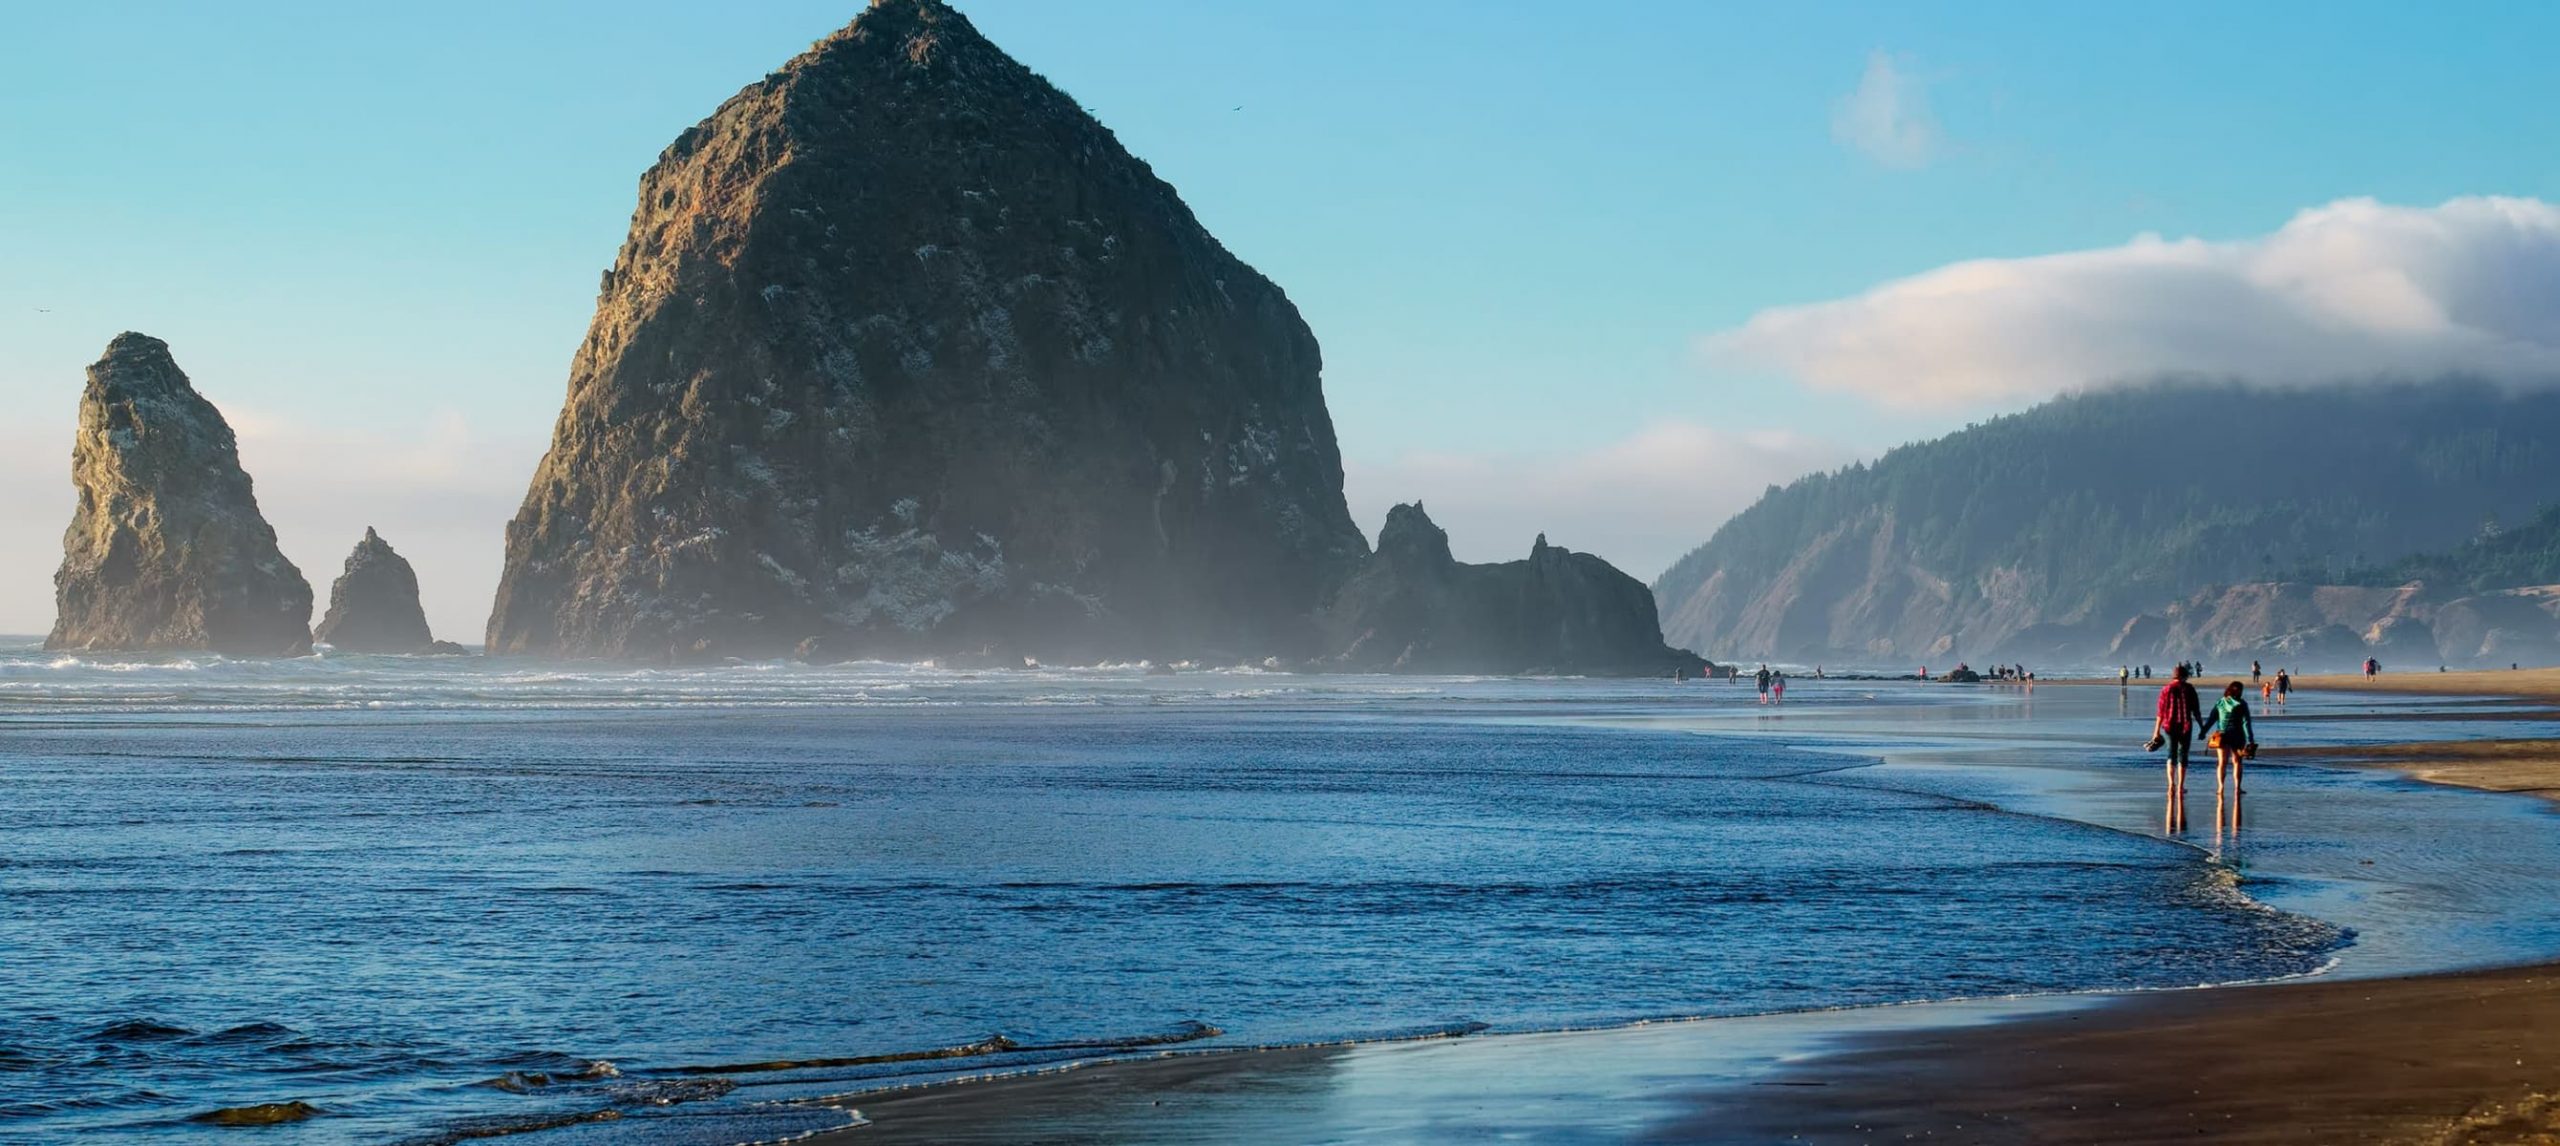 10 Amazing Things to do in Cannon Beach, Oregon